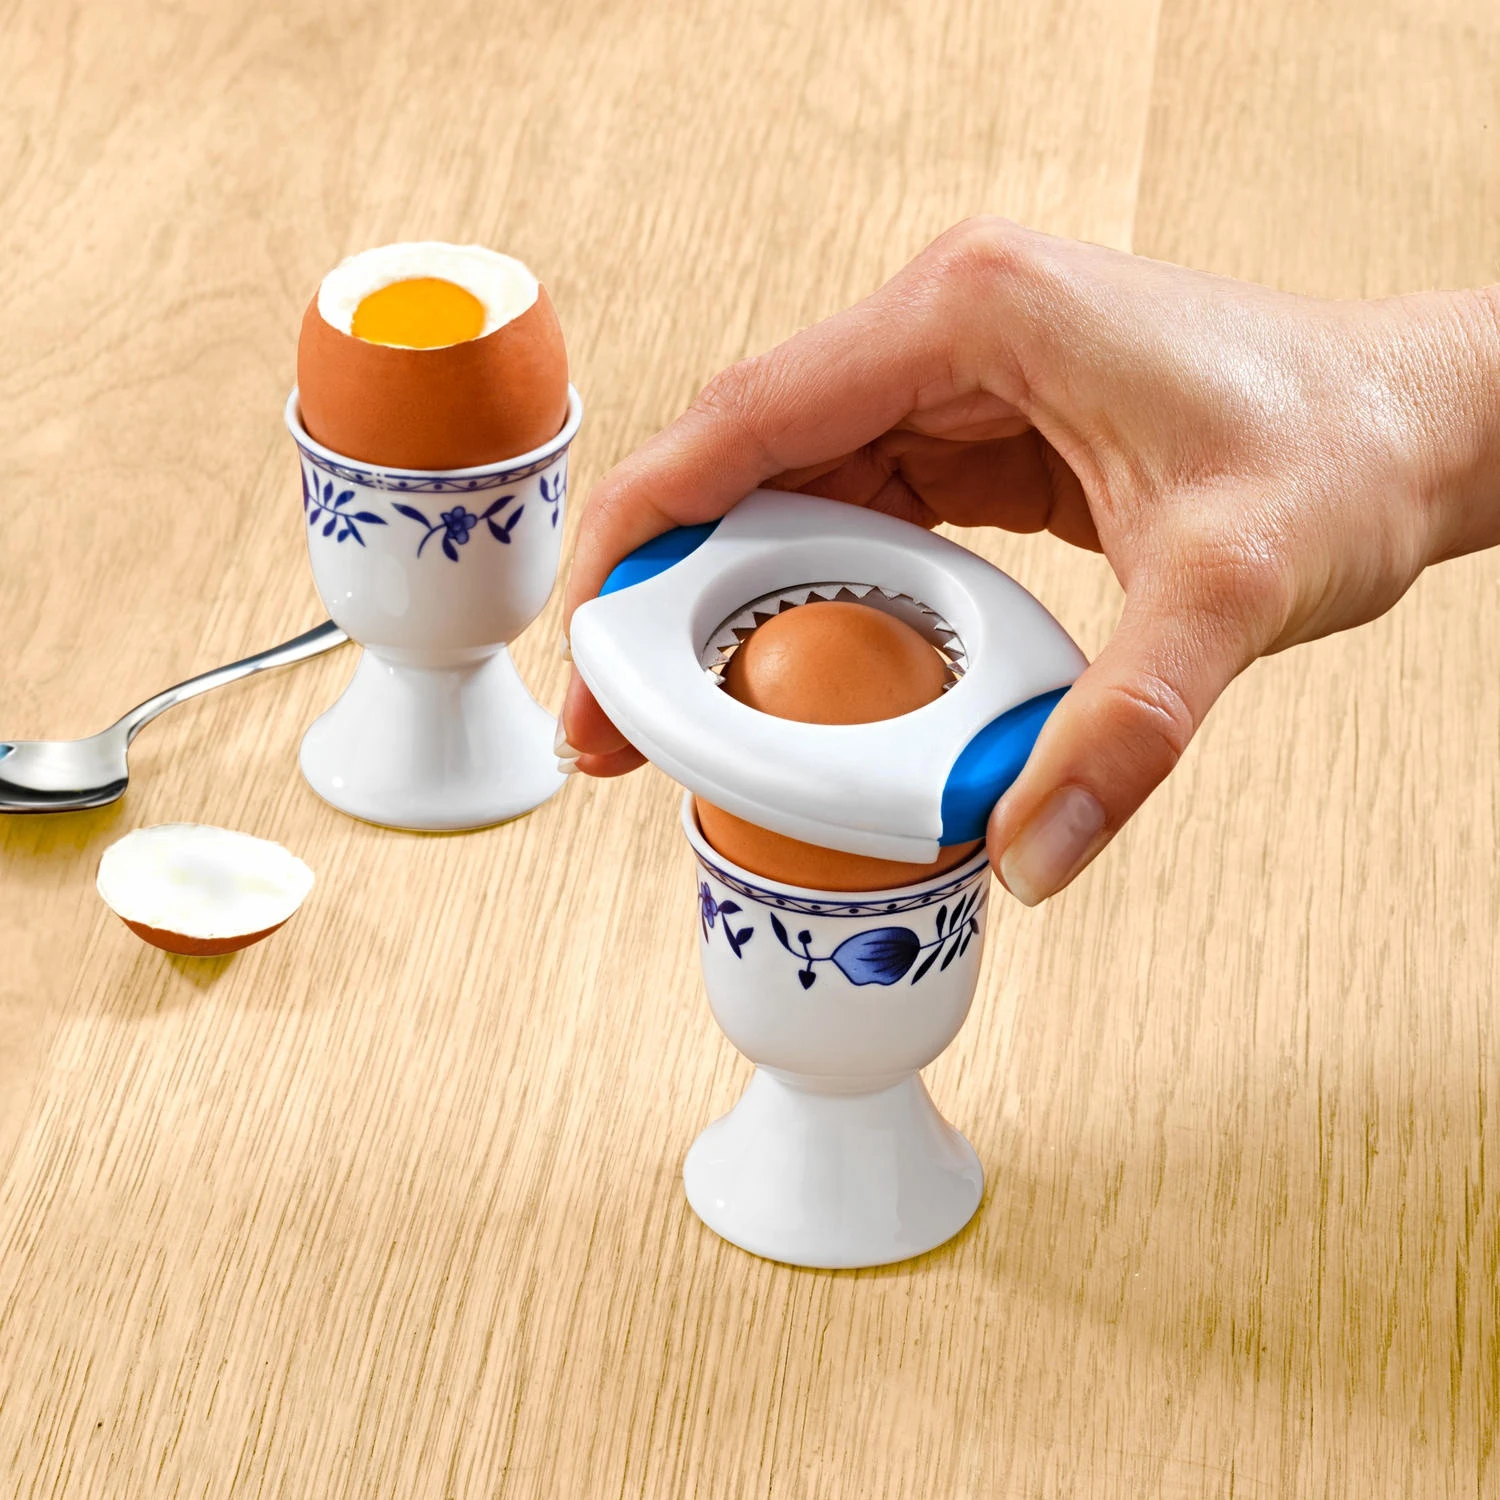 Kitchen Accessories Food Grade Egg Shell Breaker Cutter Sheller Egg opener snipper separate Topper with plastic handle